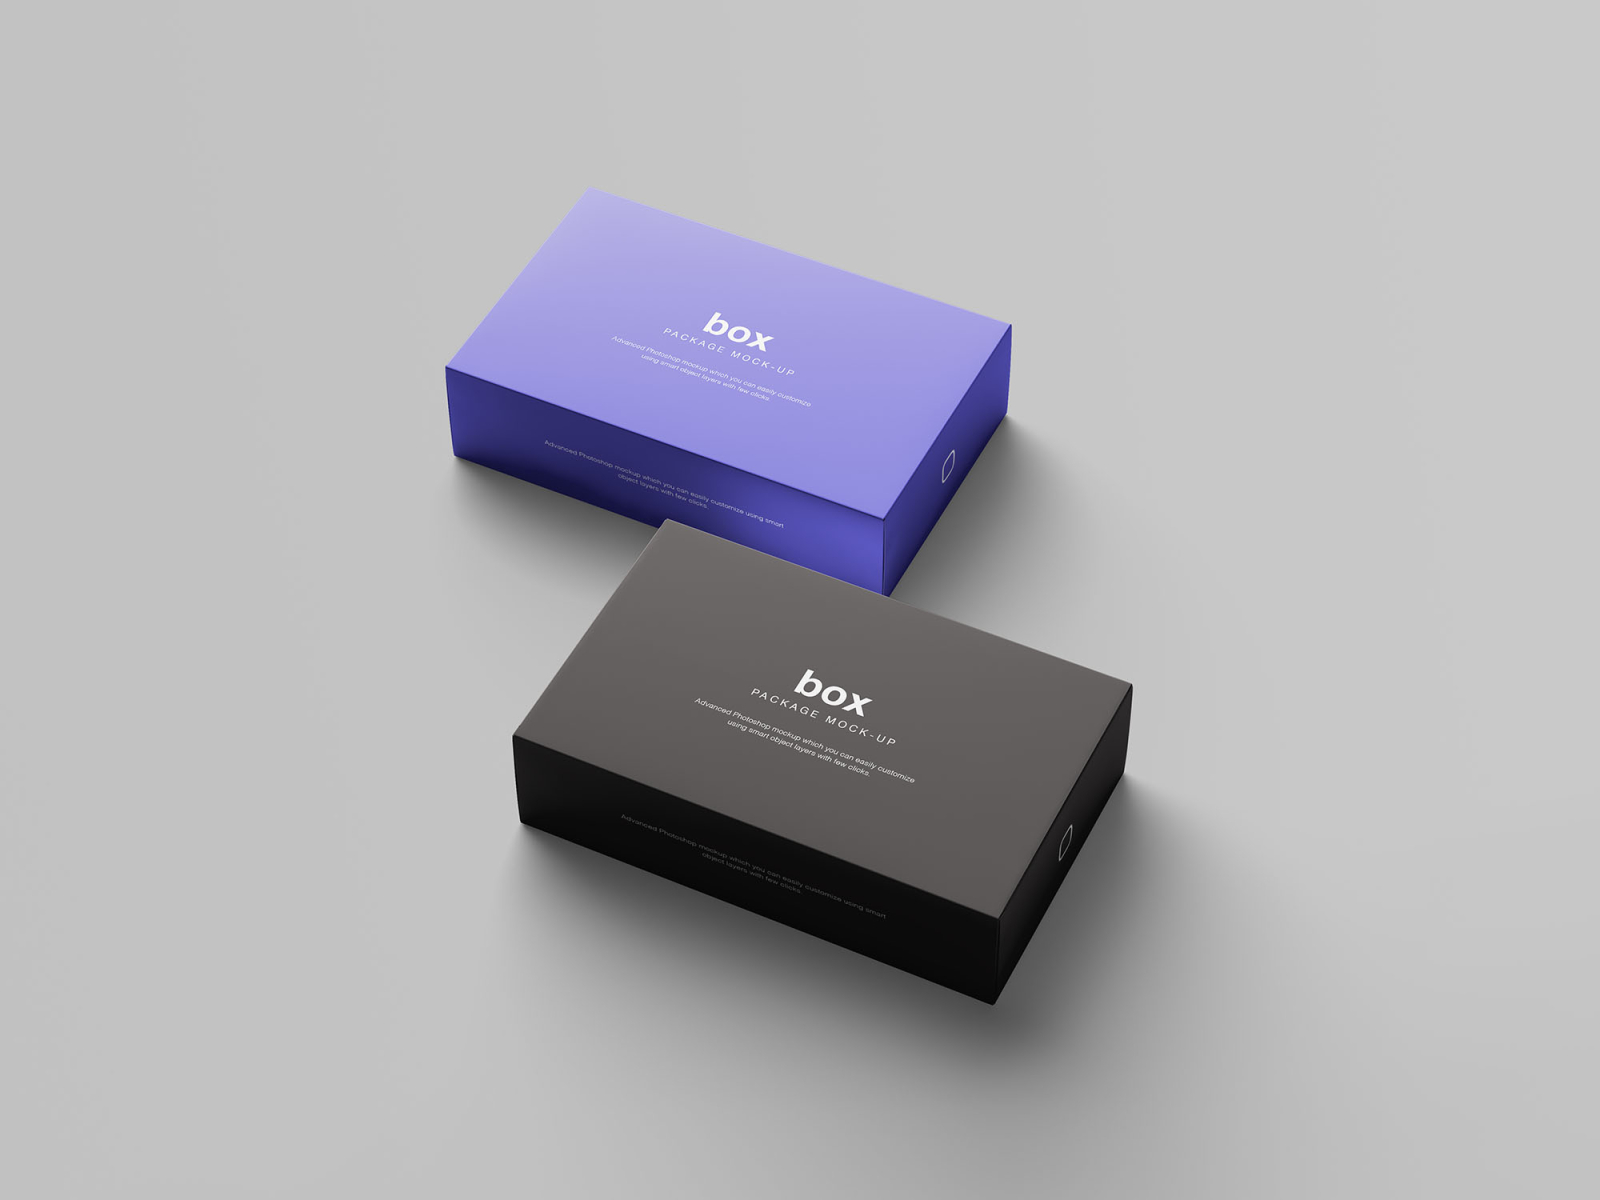 Box Packaging Mockup by Graphic Pear on Dribbble